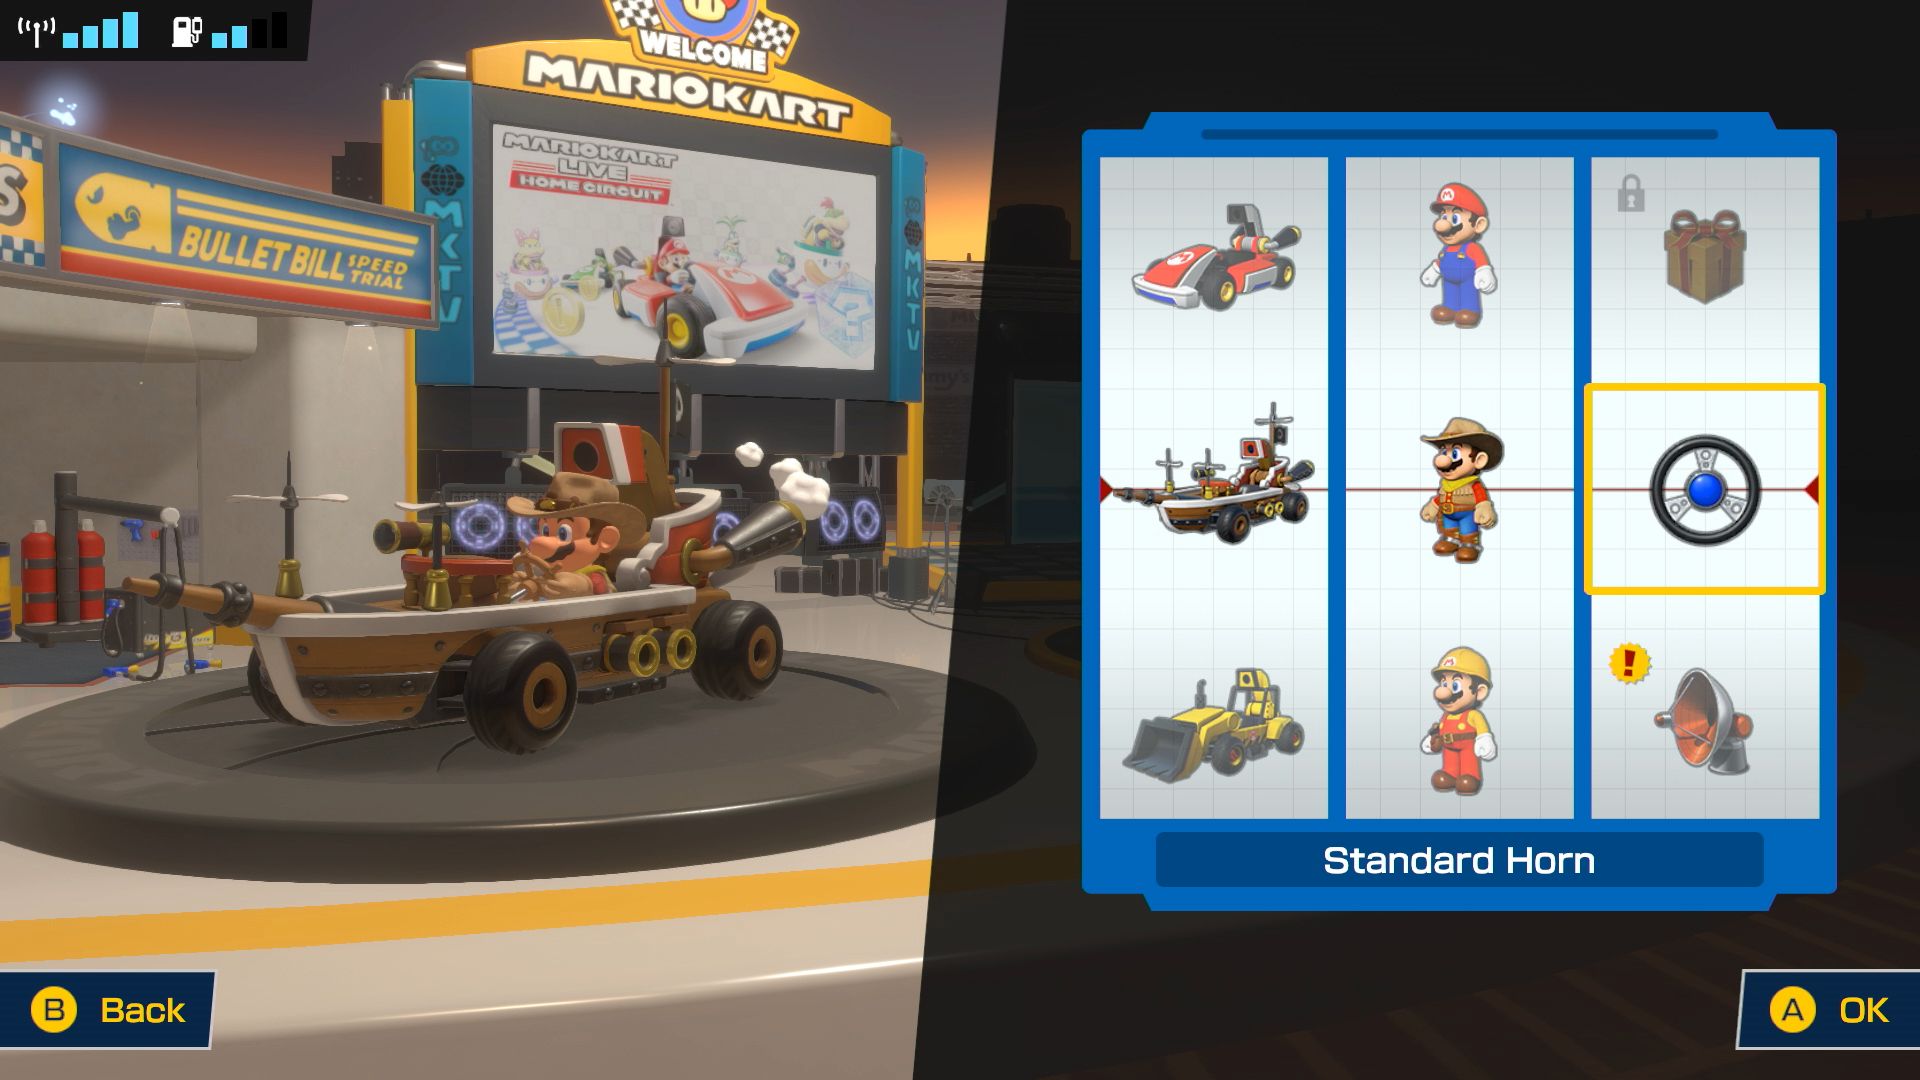 Mario Kart Live Home Circuit Review  Karting Expectations